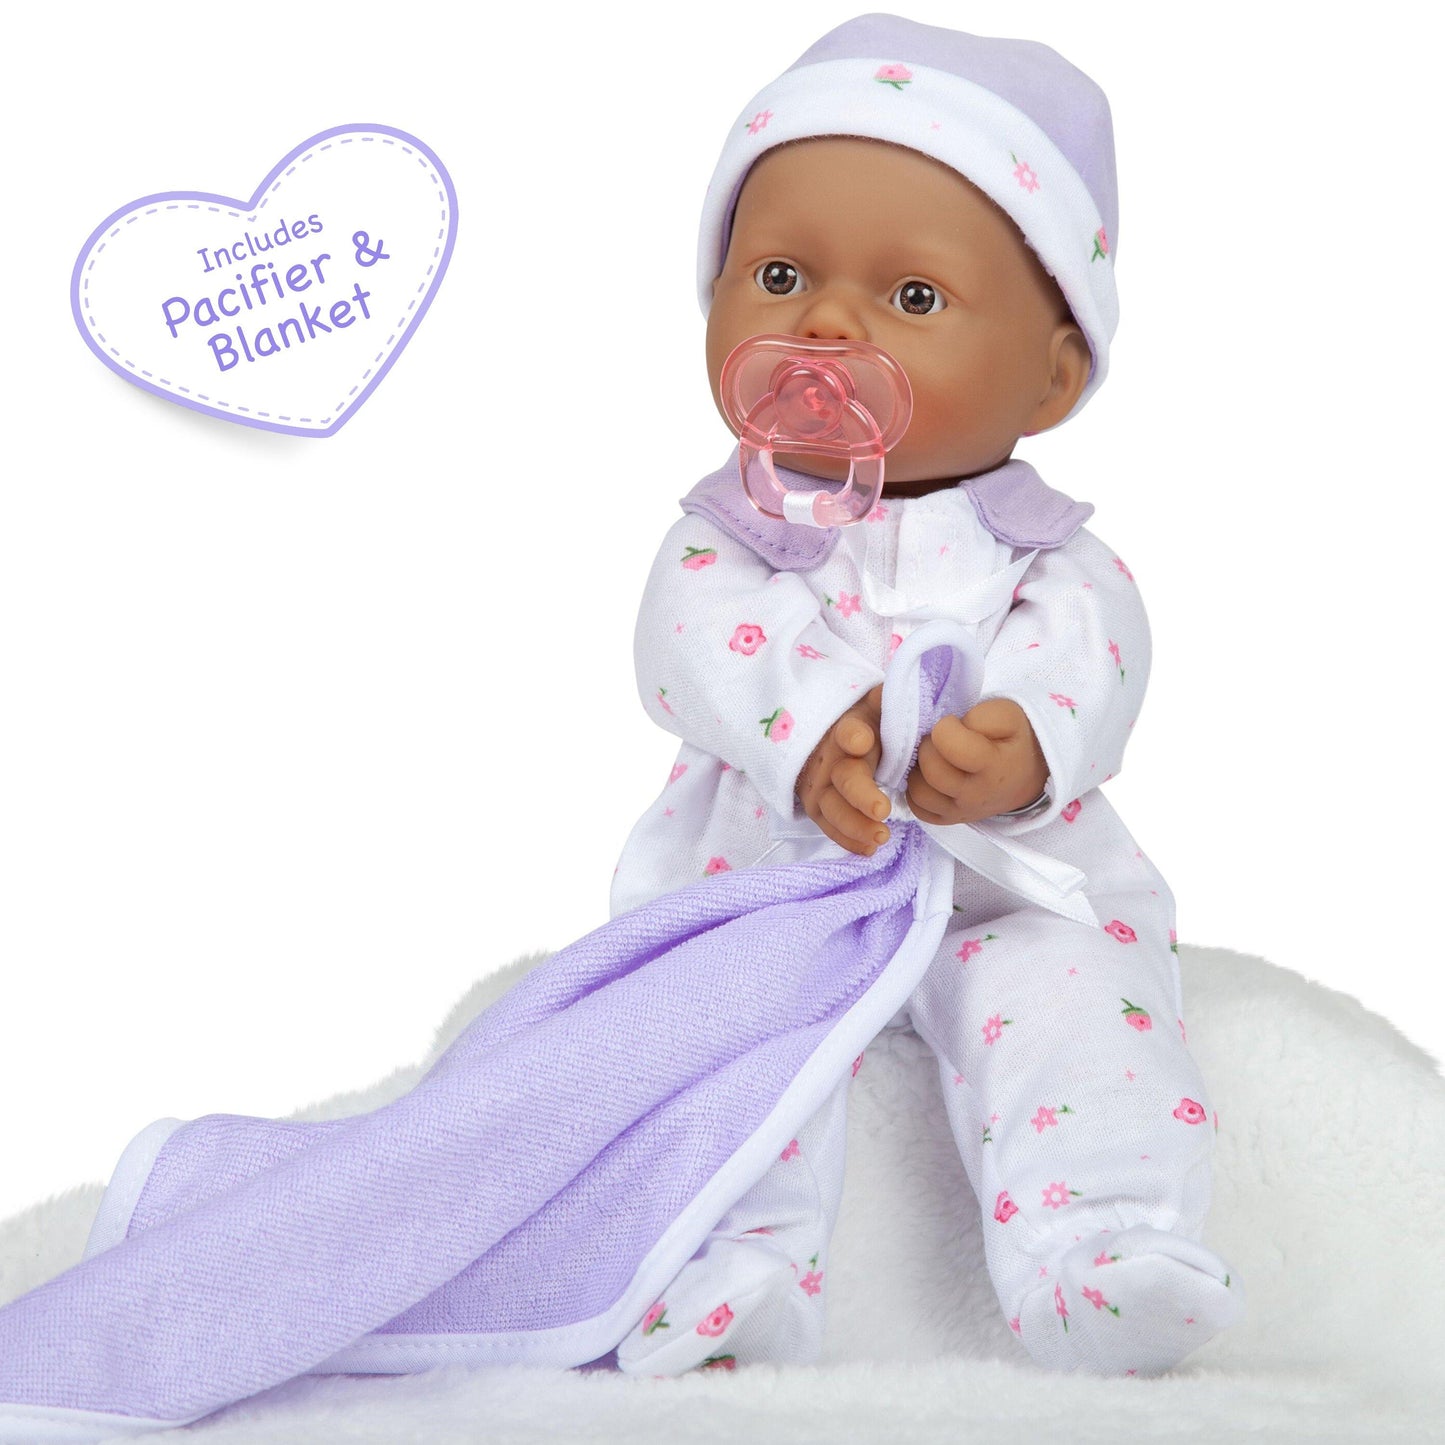 JC Toys, La Baby 11 inch Soft Body Hispanic Baby Doll in Purple Outfit - JC Toys Group Inc.